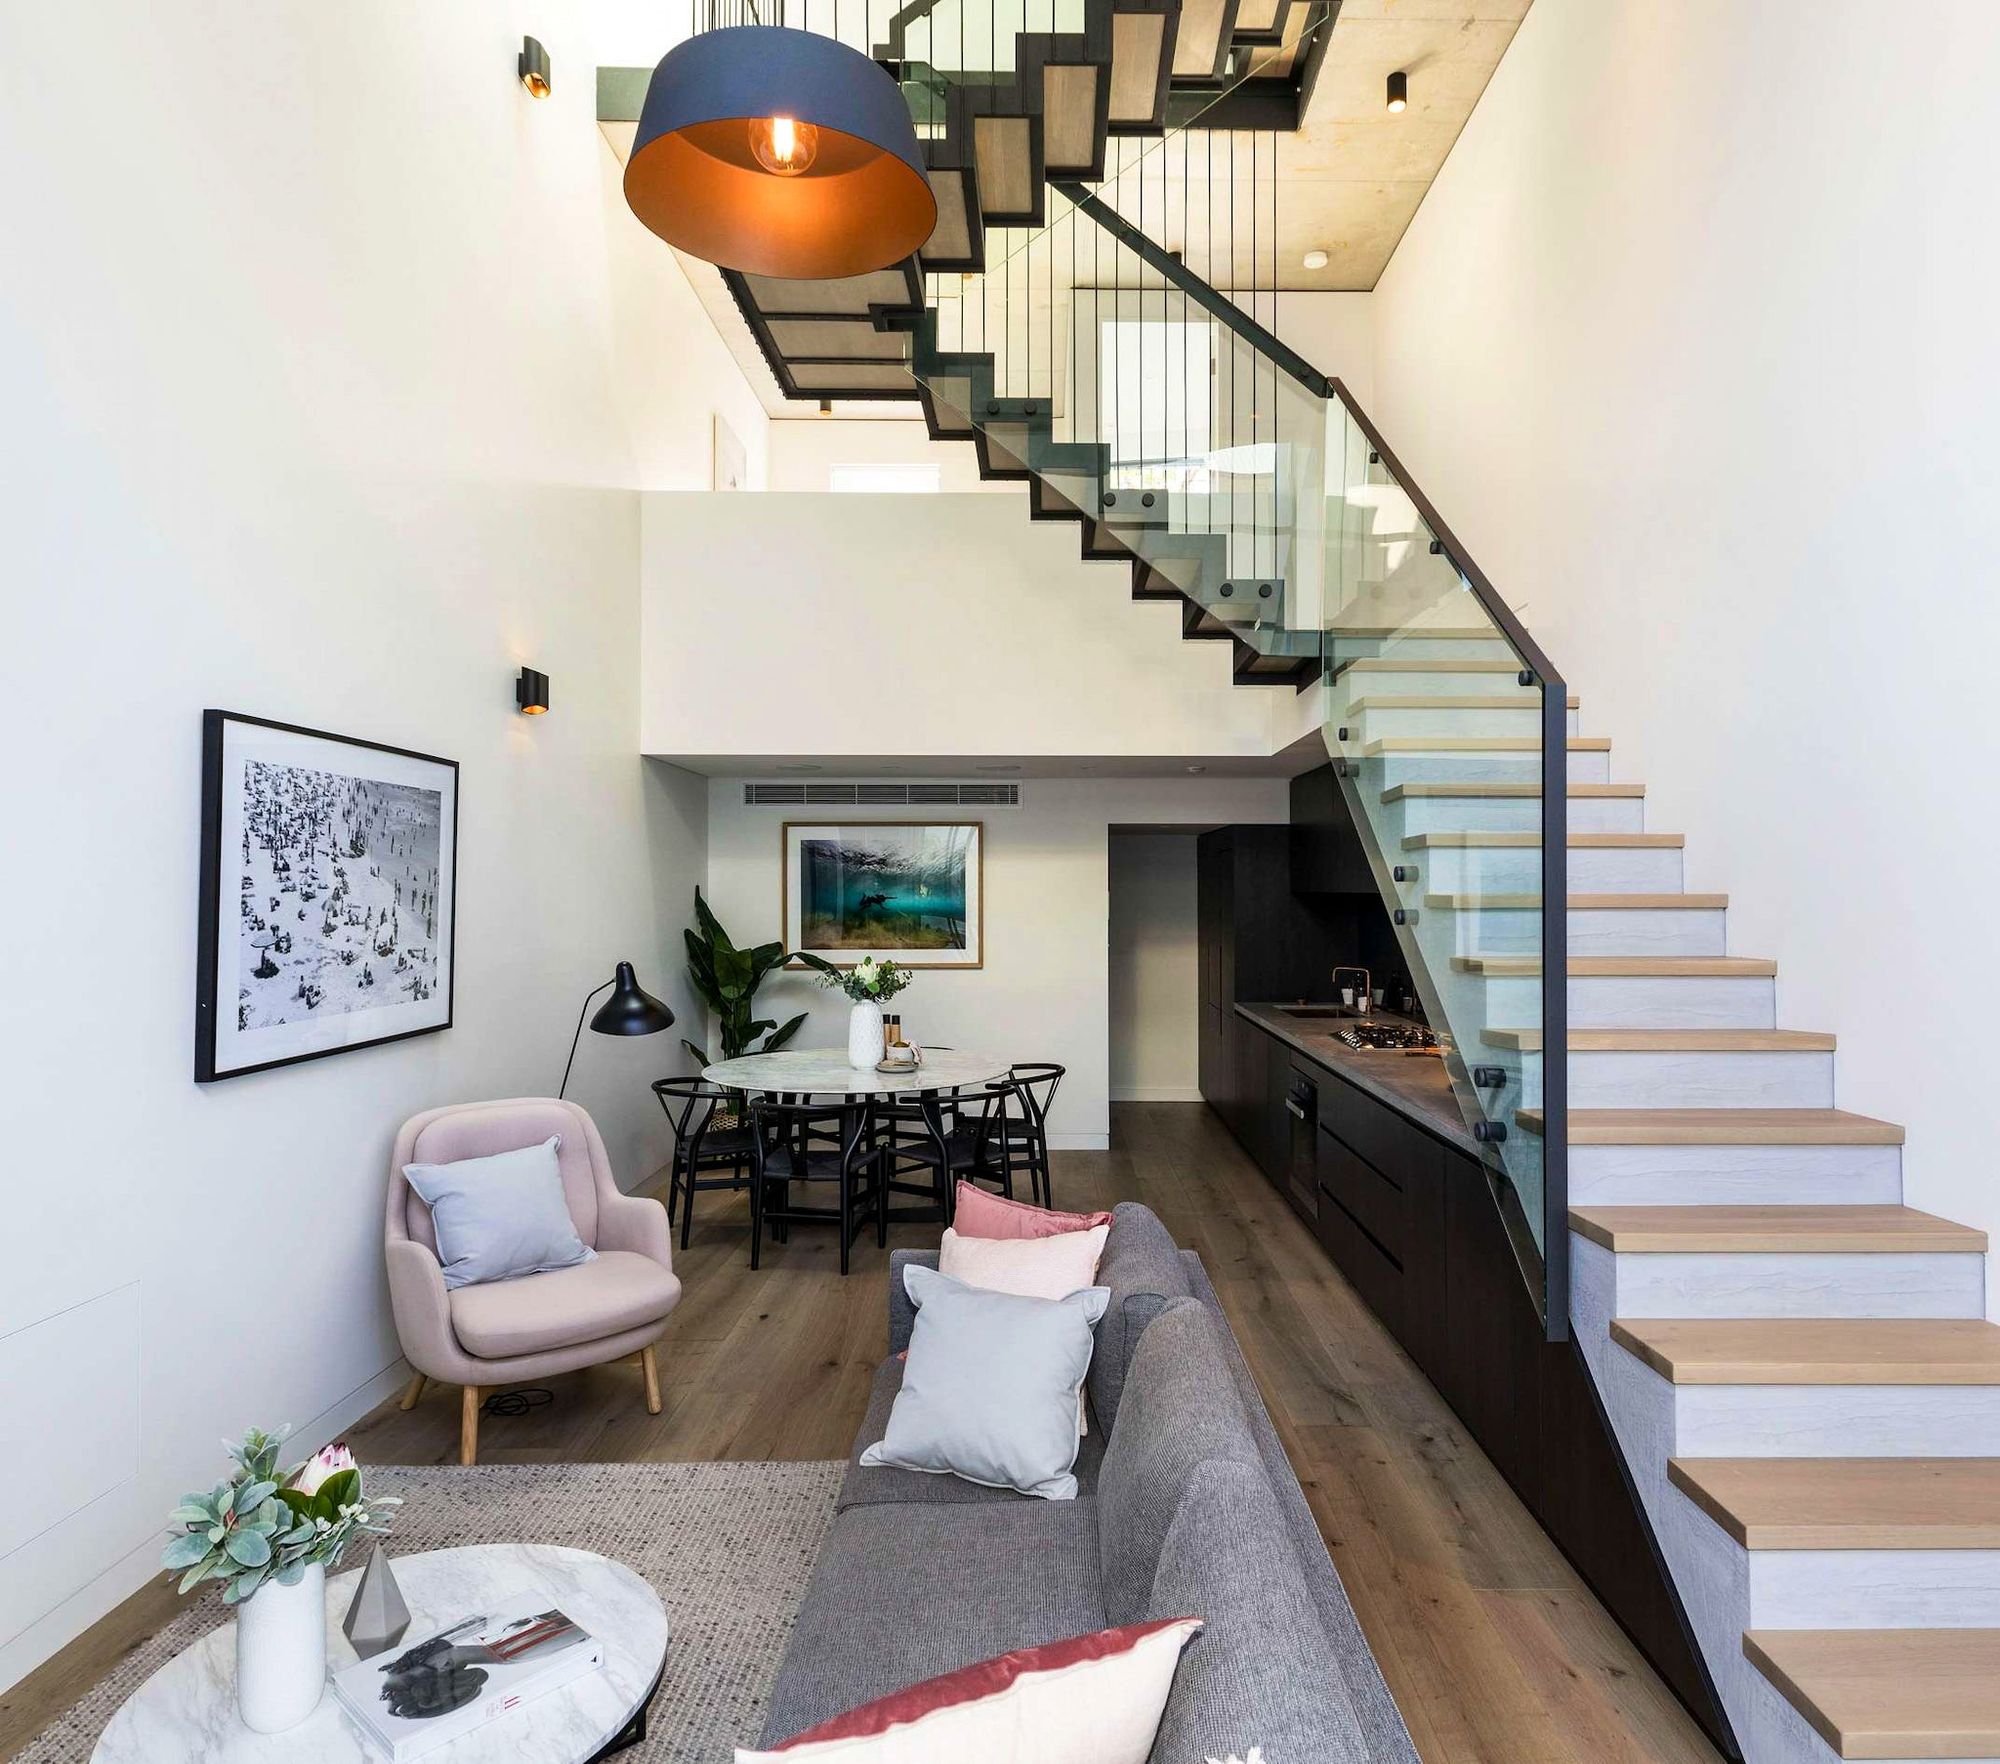 Darlinghurst Residence by JKMarchitects showing internal view of living area and feature staircase